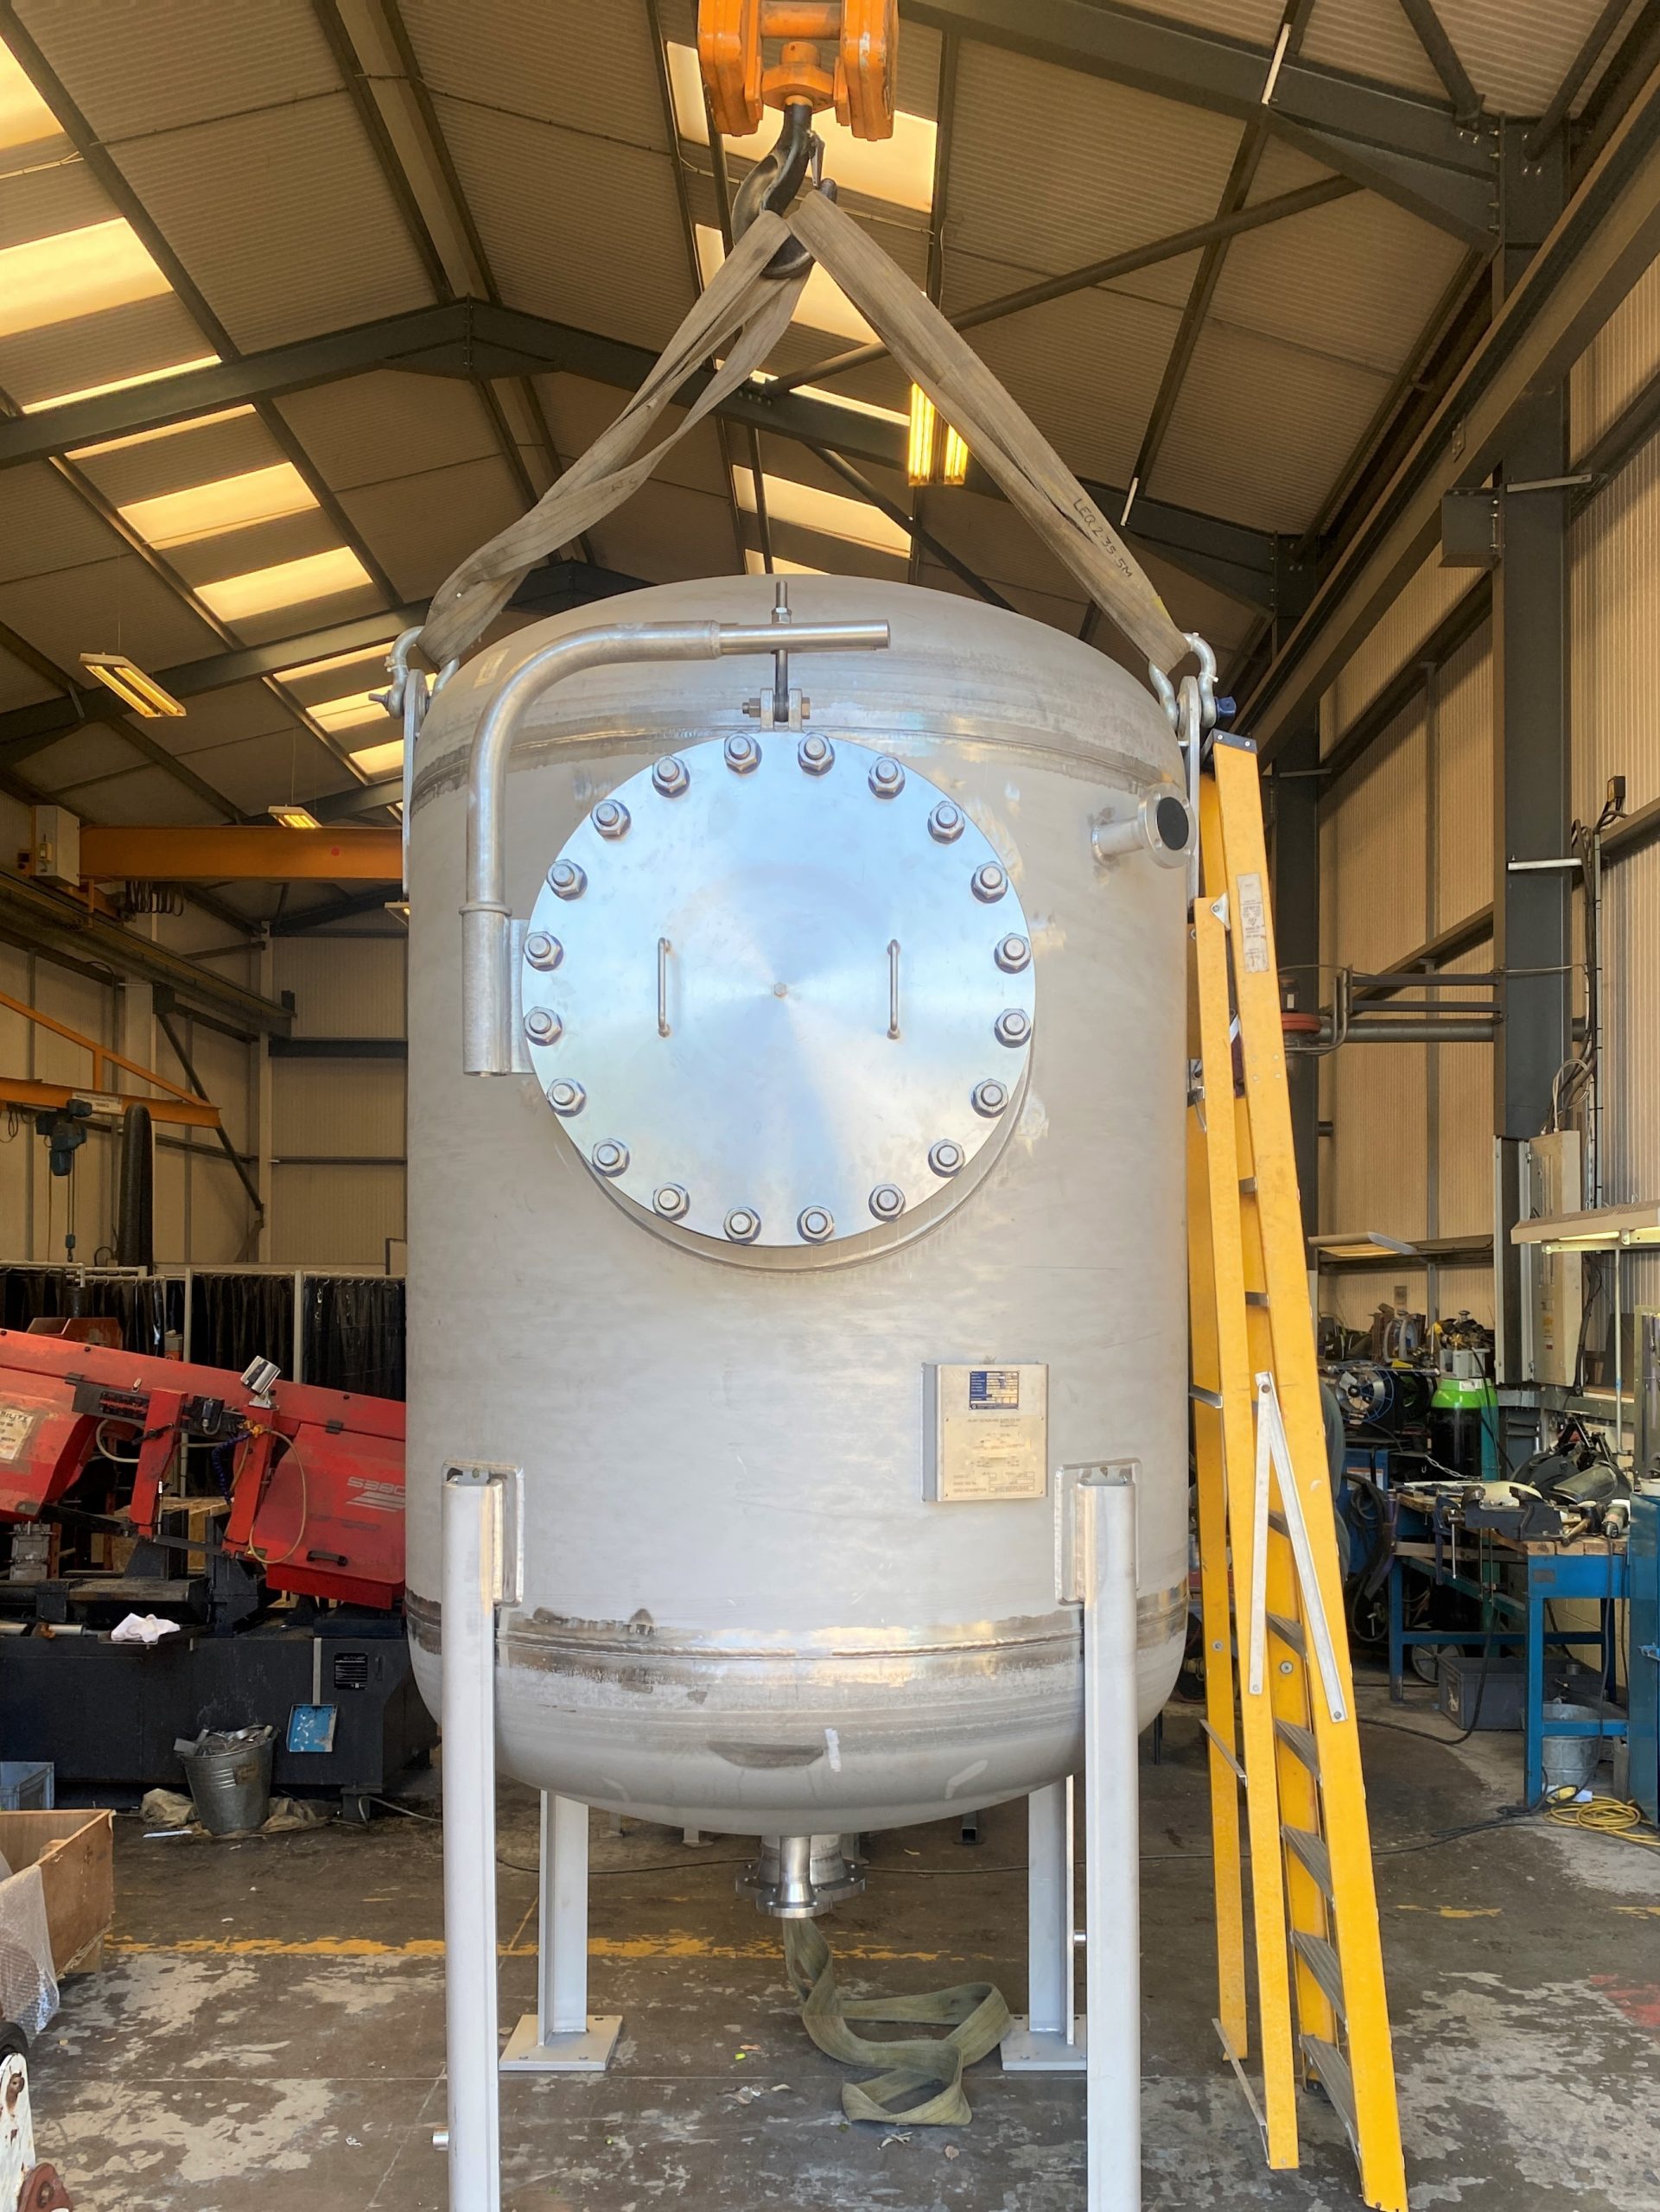 Stainless steel pressure vessel for pure water filtration used in the hydrogen industry